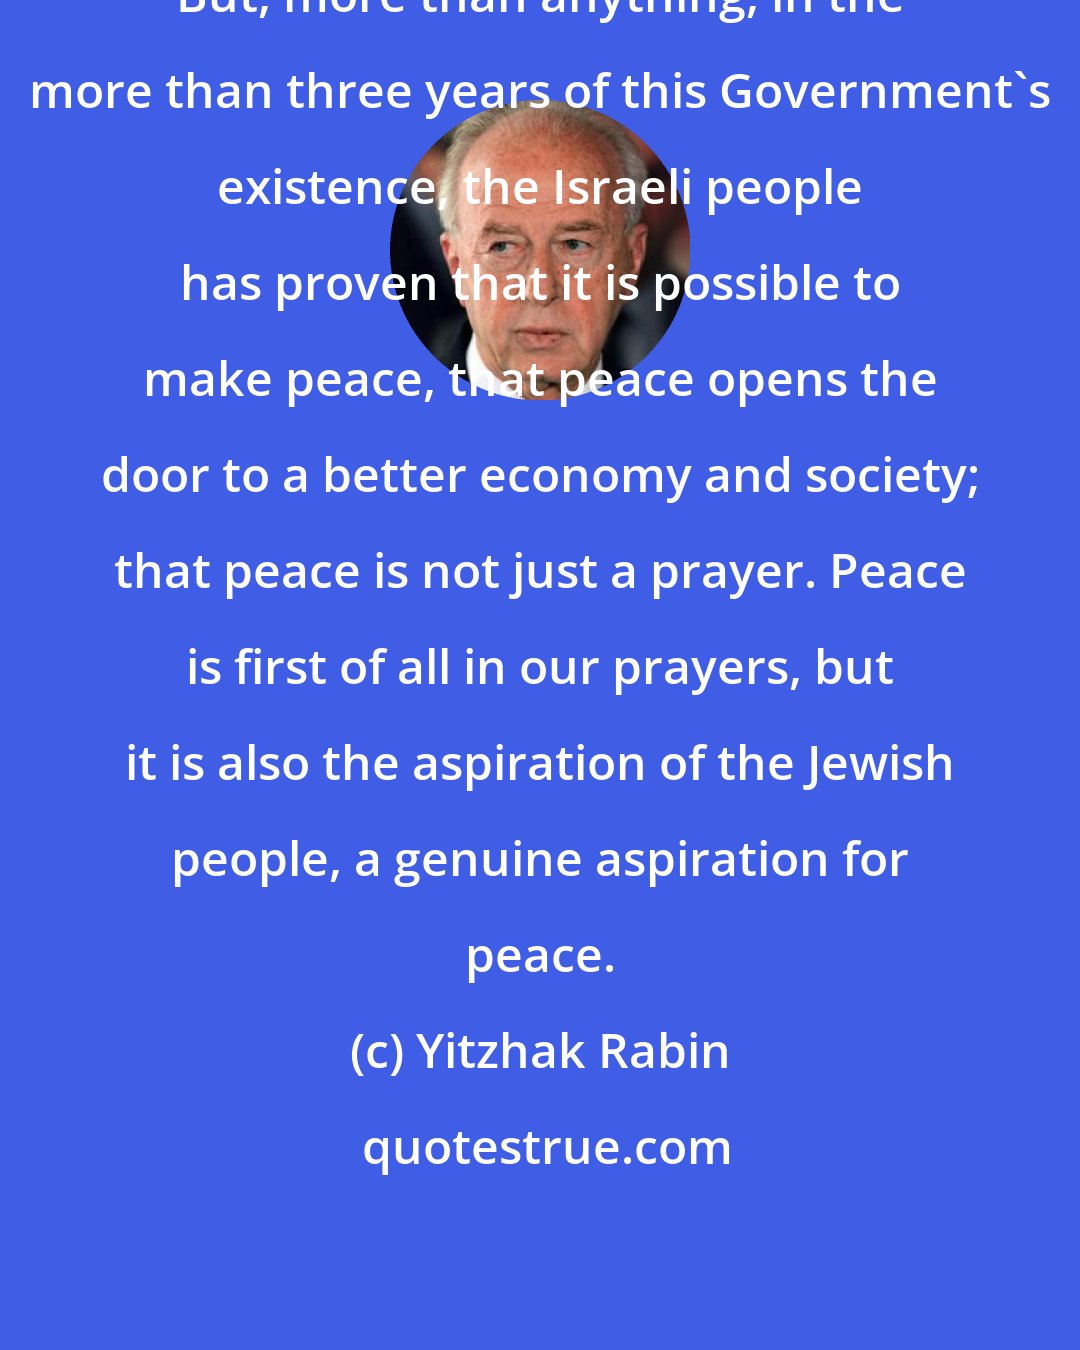 Yitzhak Rabin: But, more than anything, in the more than three years of this Government's existence, the Israeli people has proven that it is possible to make peace, that peace opens the door to a better economy and society; that peace is not just a prayer. Peace is first of all in our prayers, but it is also the aspiration of the Jewish people, a genuine aspiration for peace.